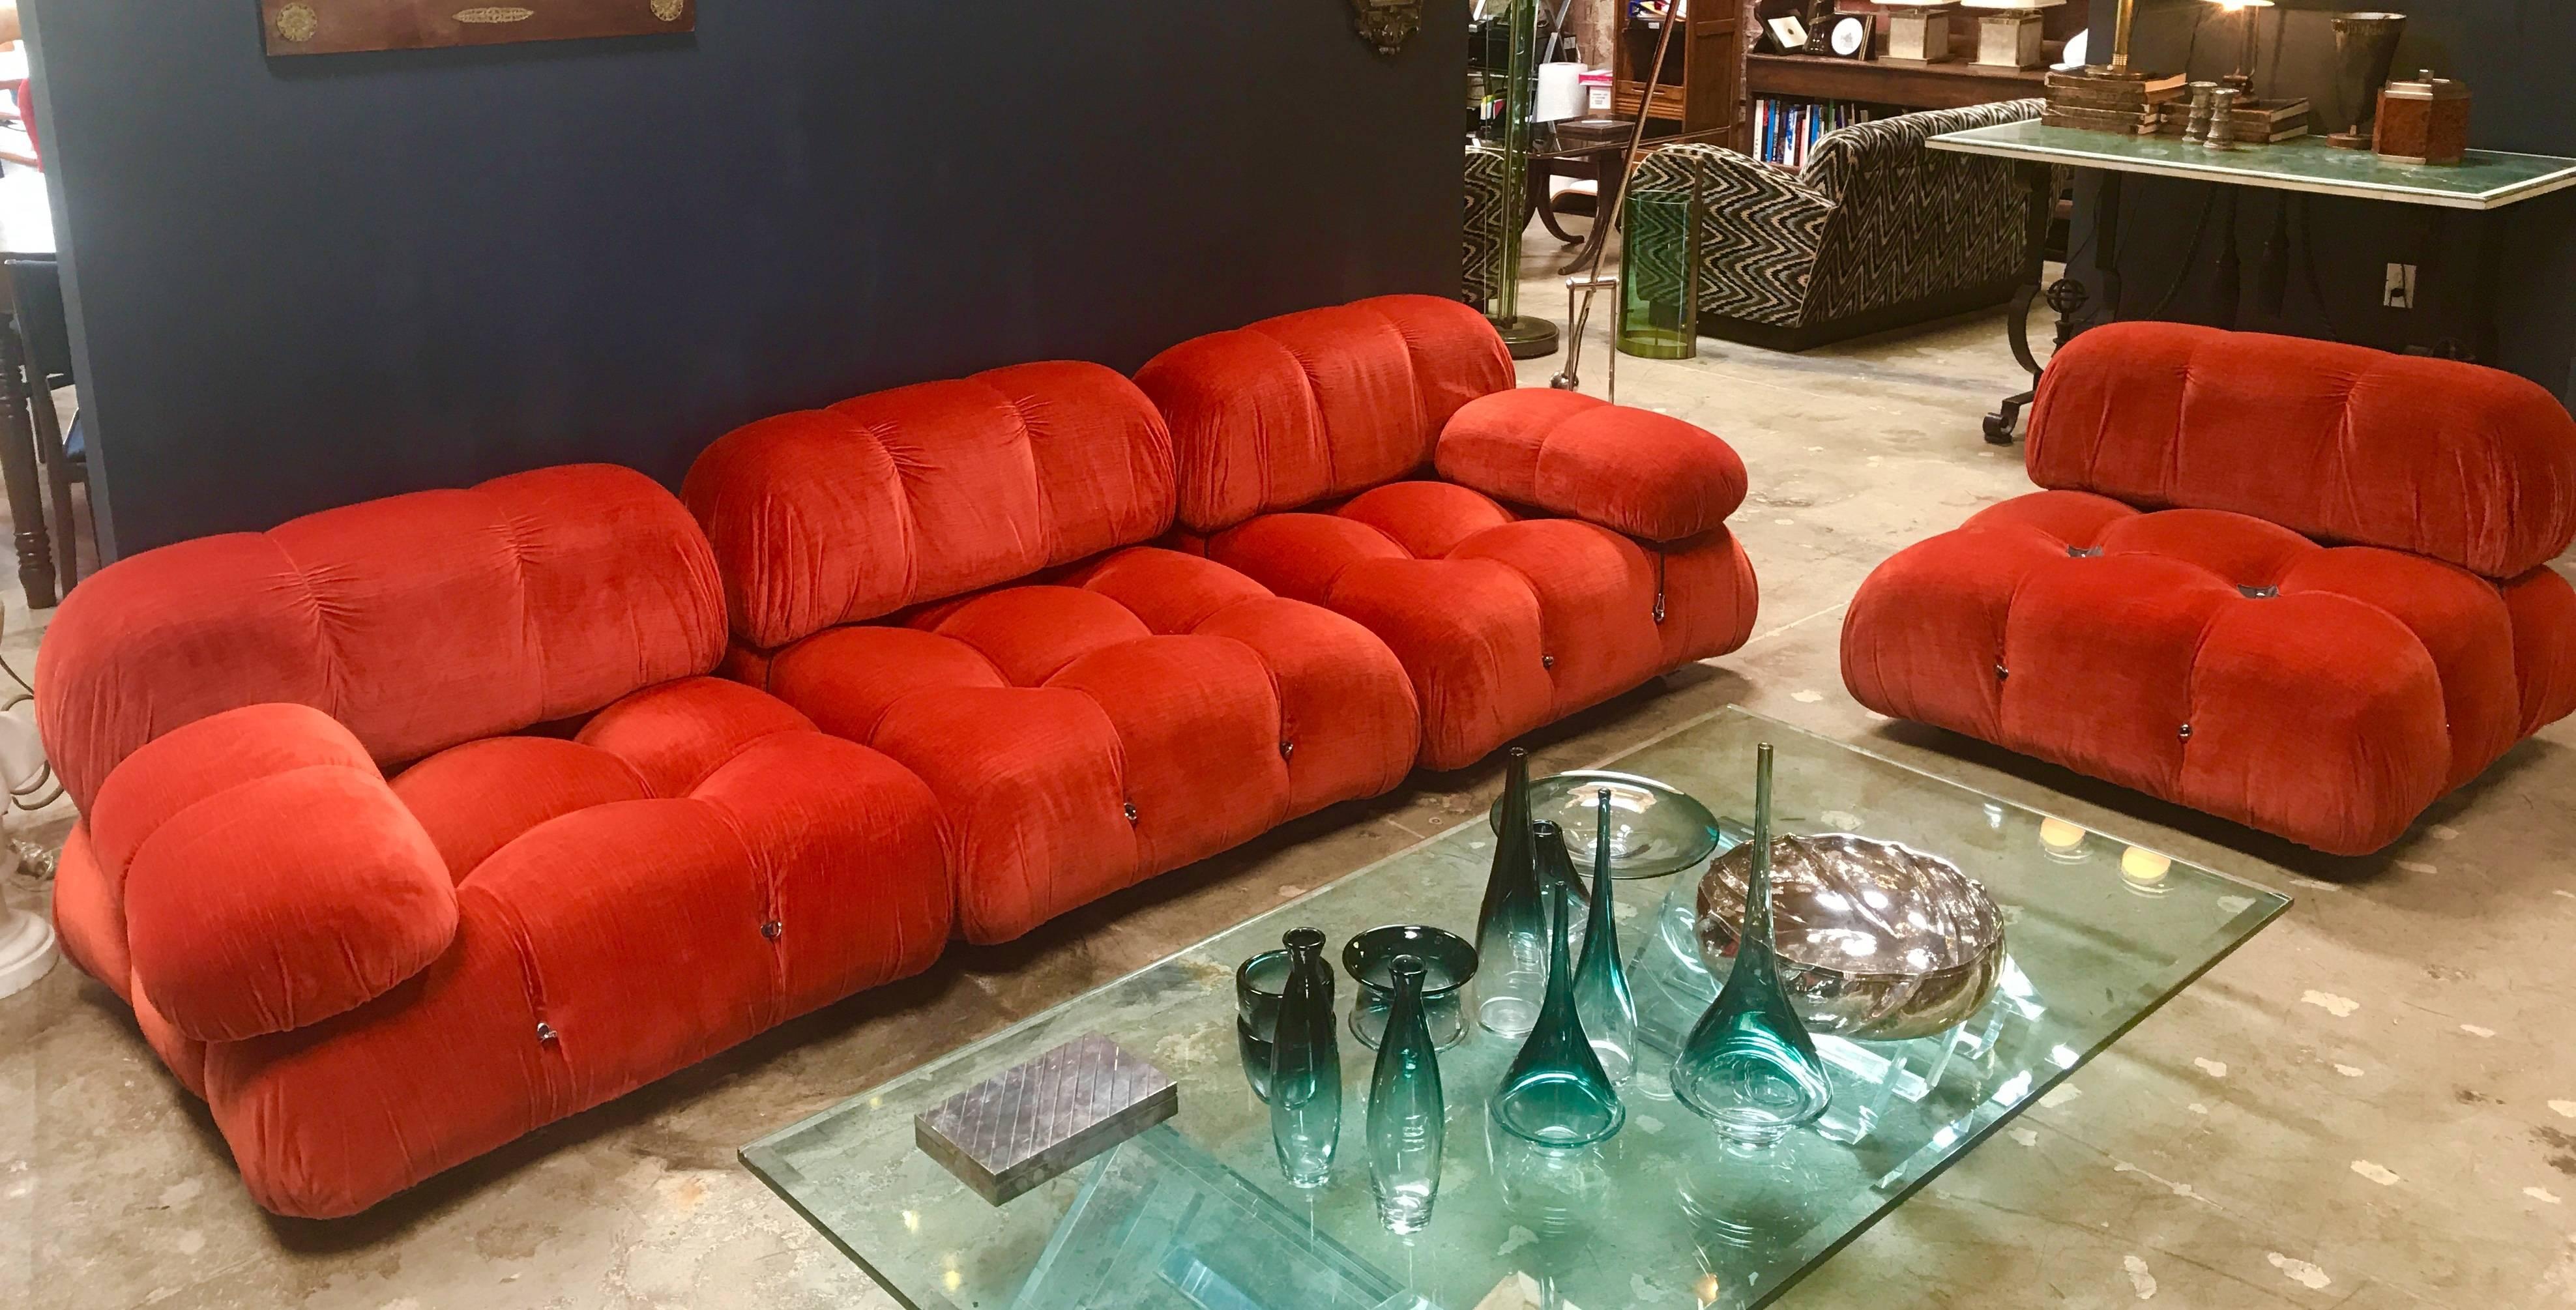 We have another six pieces available.
These four sectional elements of this sofa can be used freely and apart from one another. The backs and armrests are provided with rings and carabiners, which allows the user to create a perfect 'seating